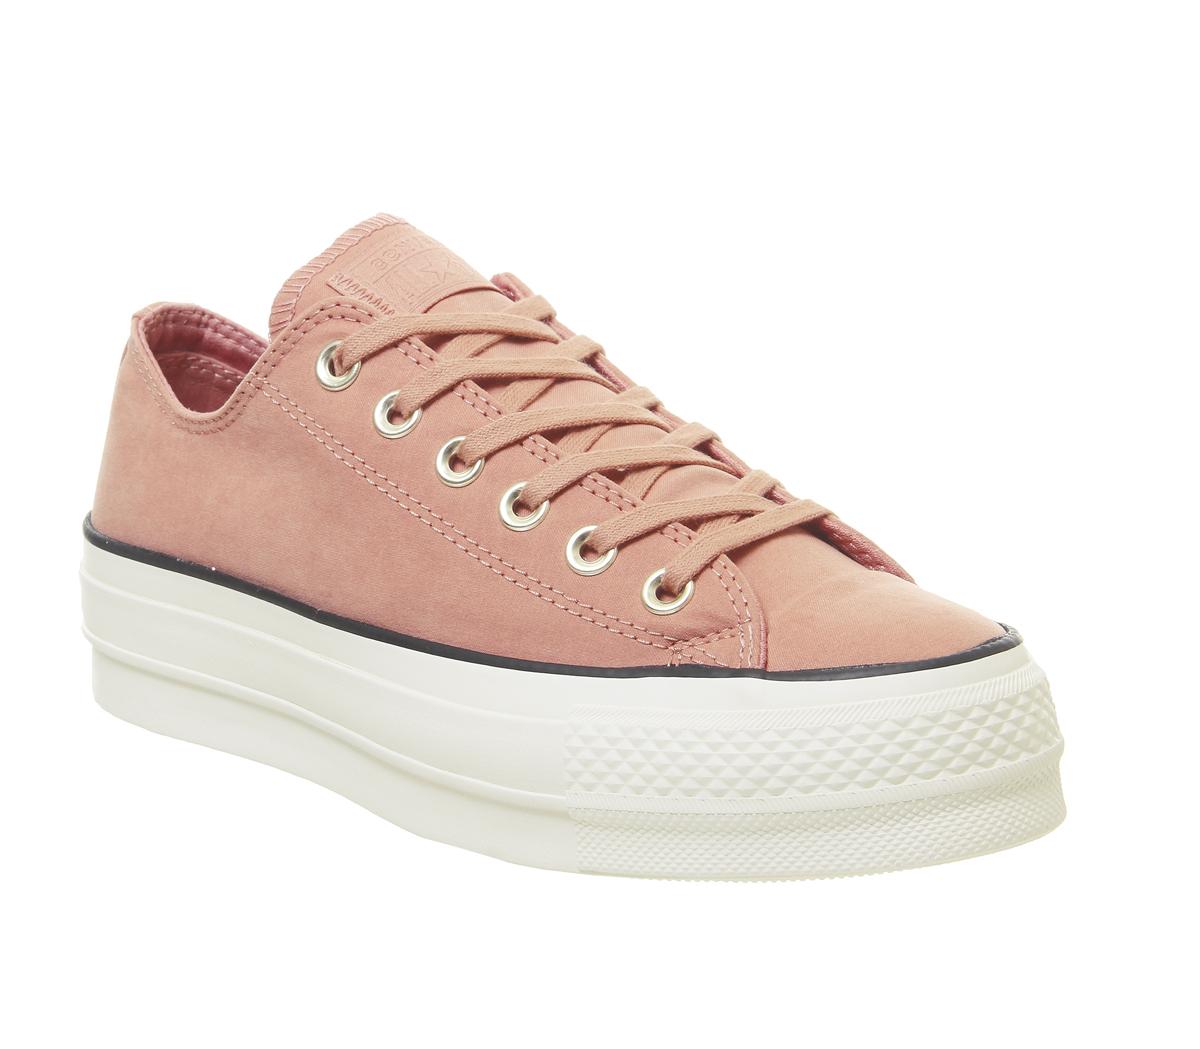 blush pink trainers